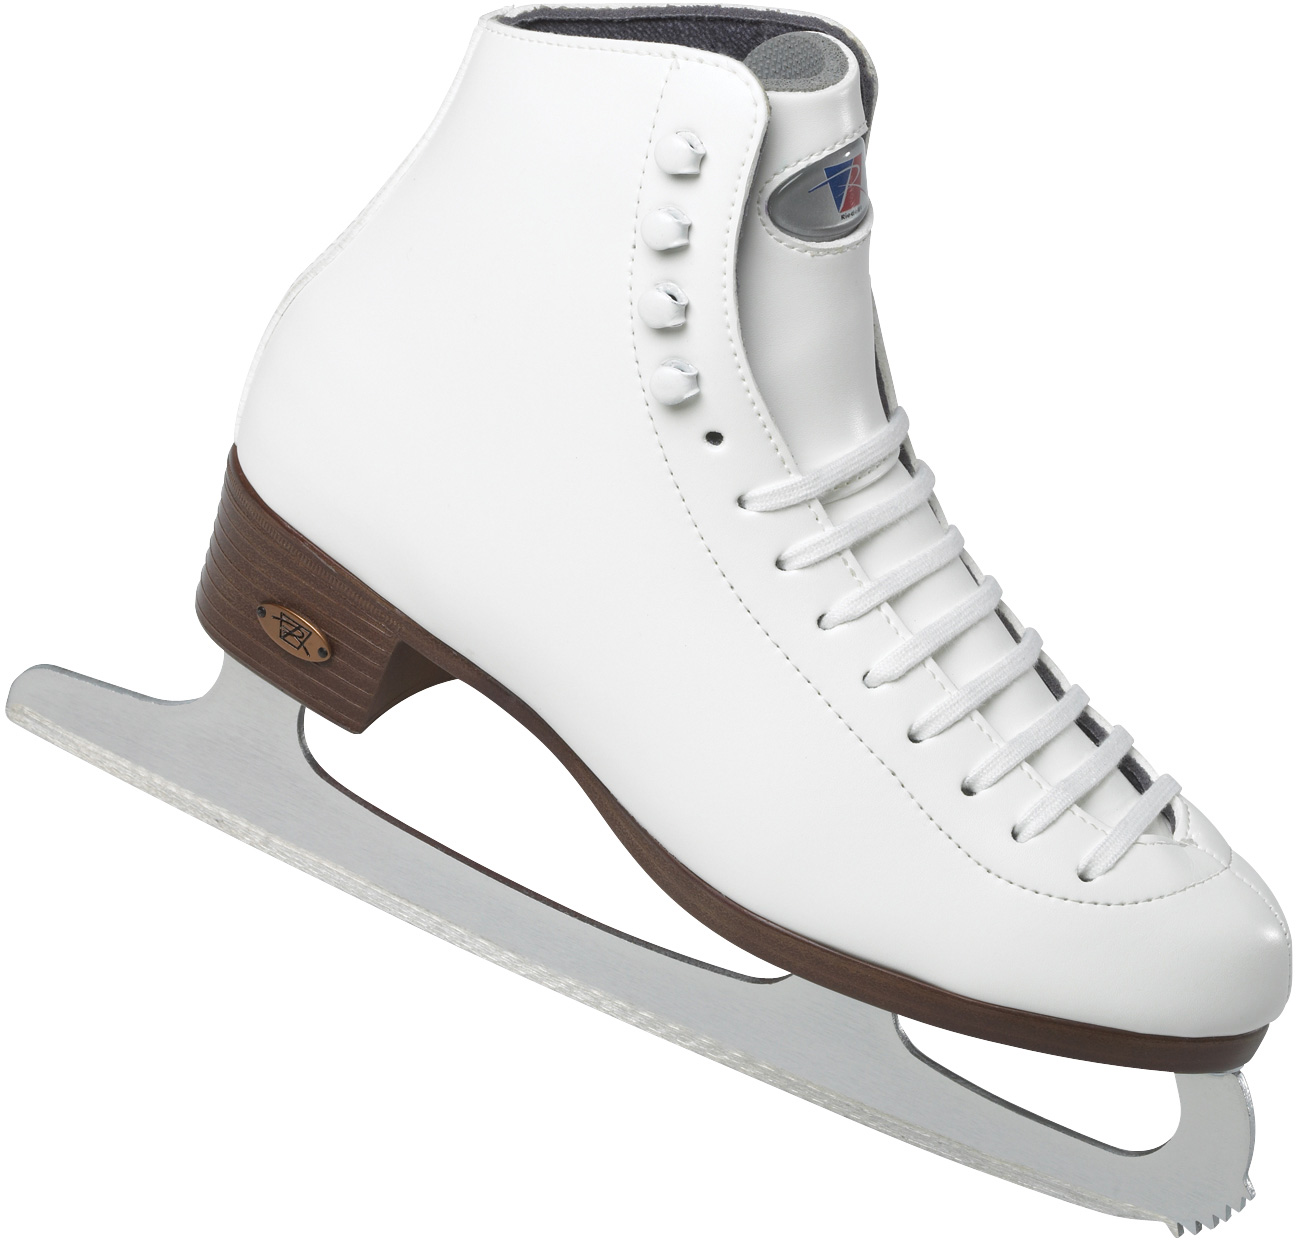 Riedell 15 RS Ice Skate - Girls